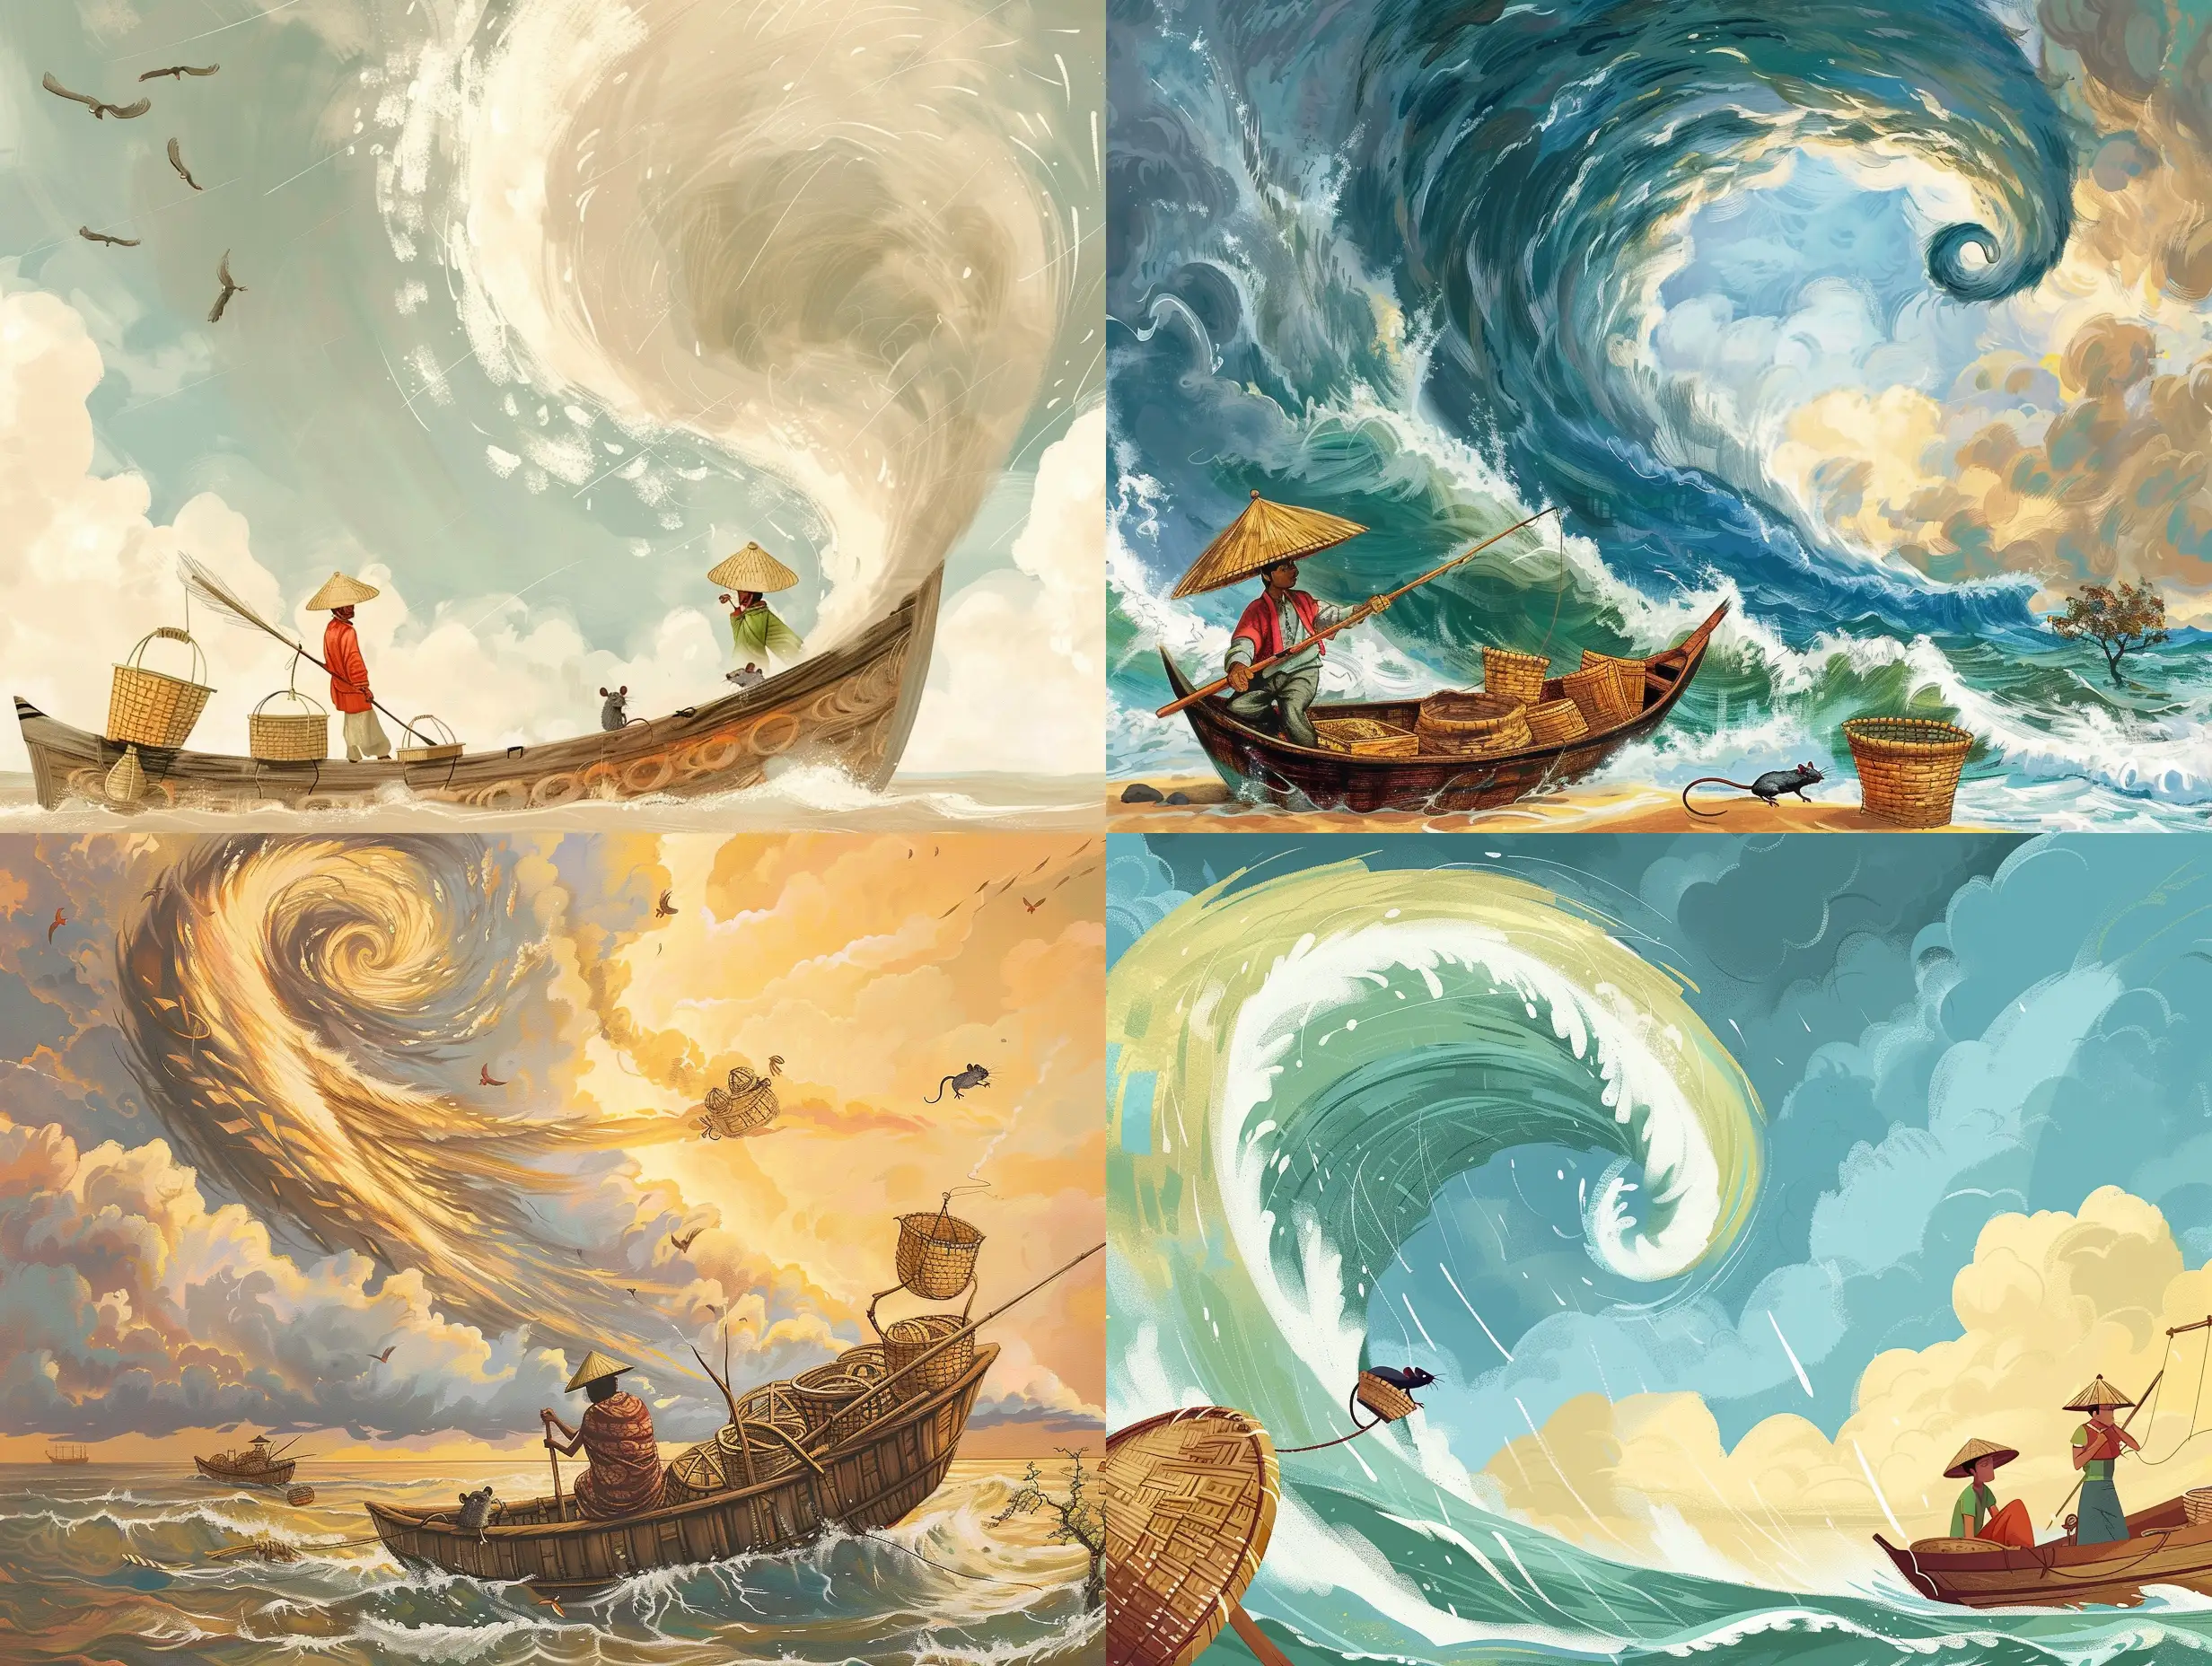 Indonesian-Fishermen-Lifted-by-Sea-Whirlwind-Disney-Fairytale-Illustration